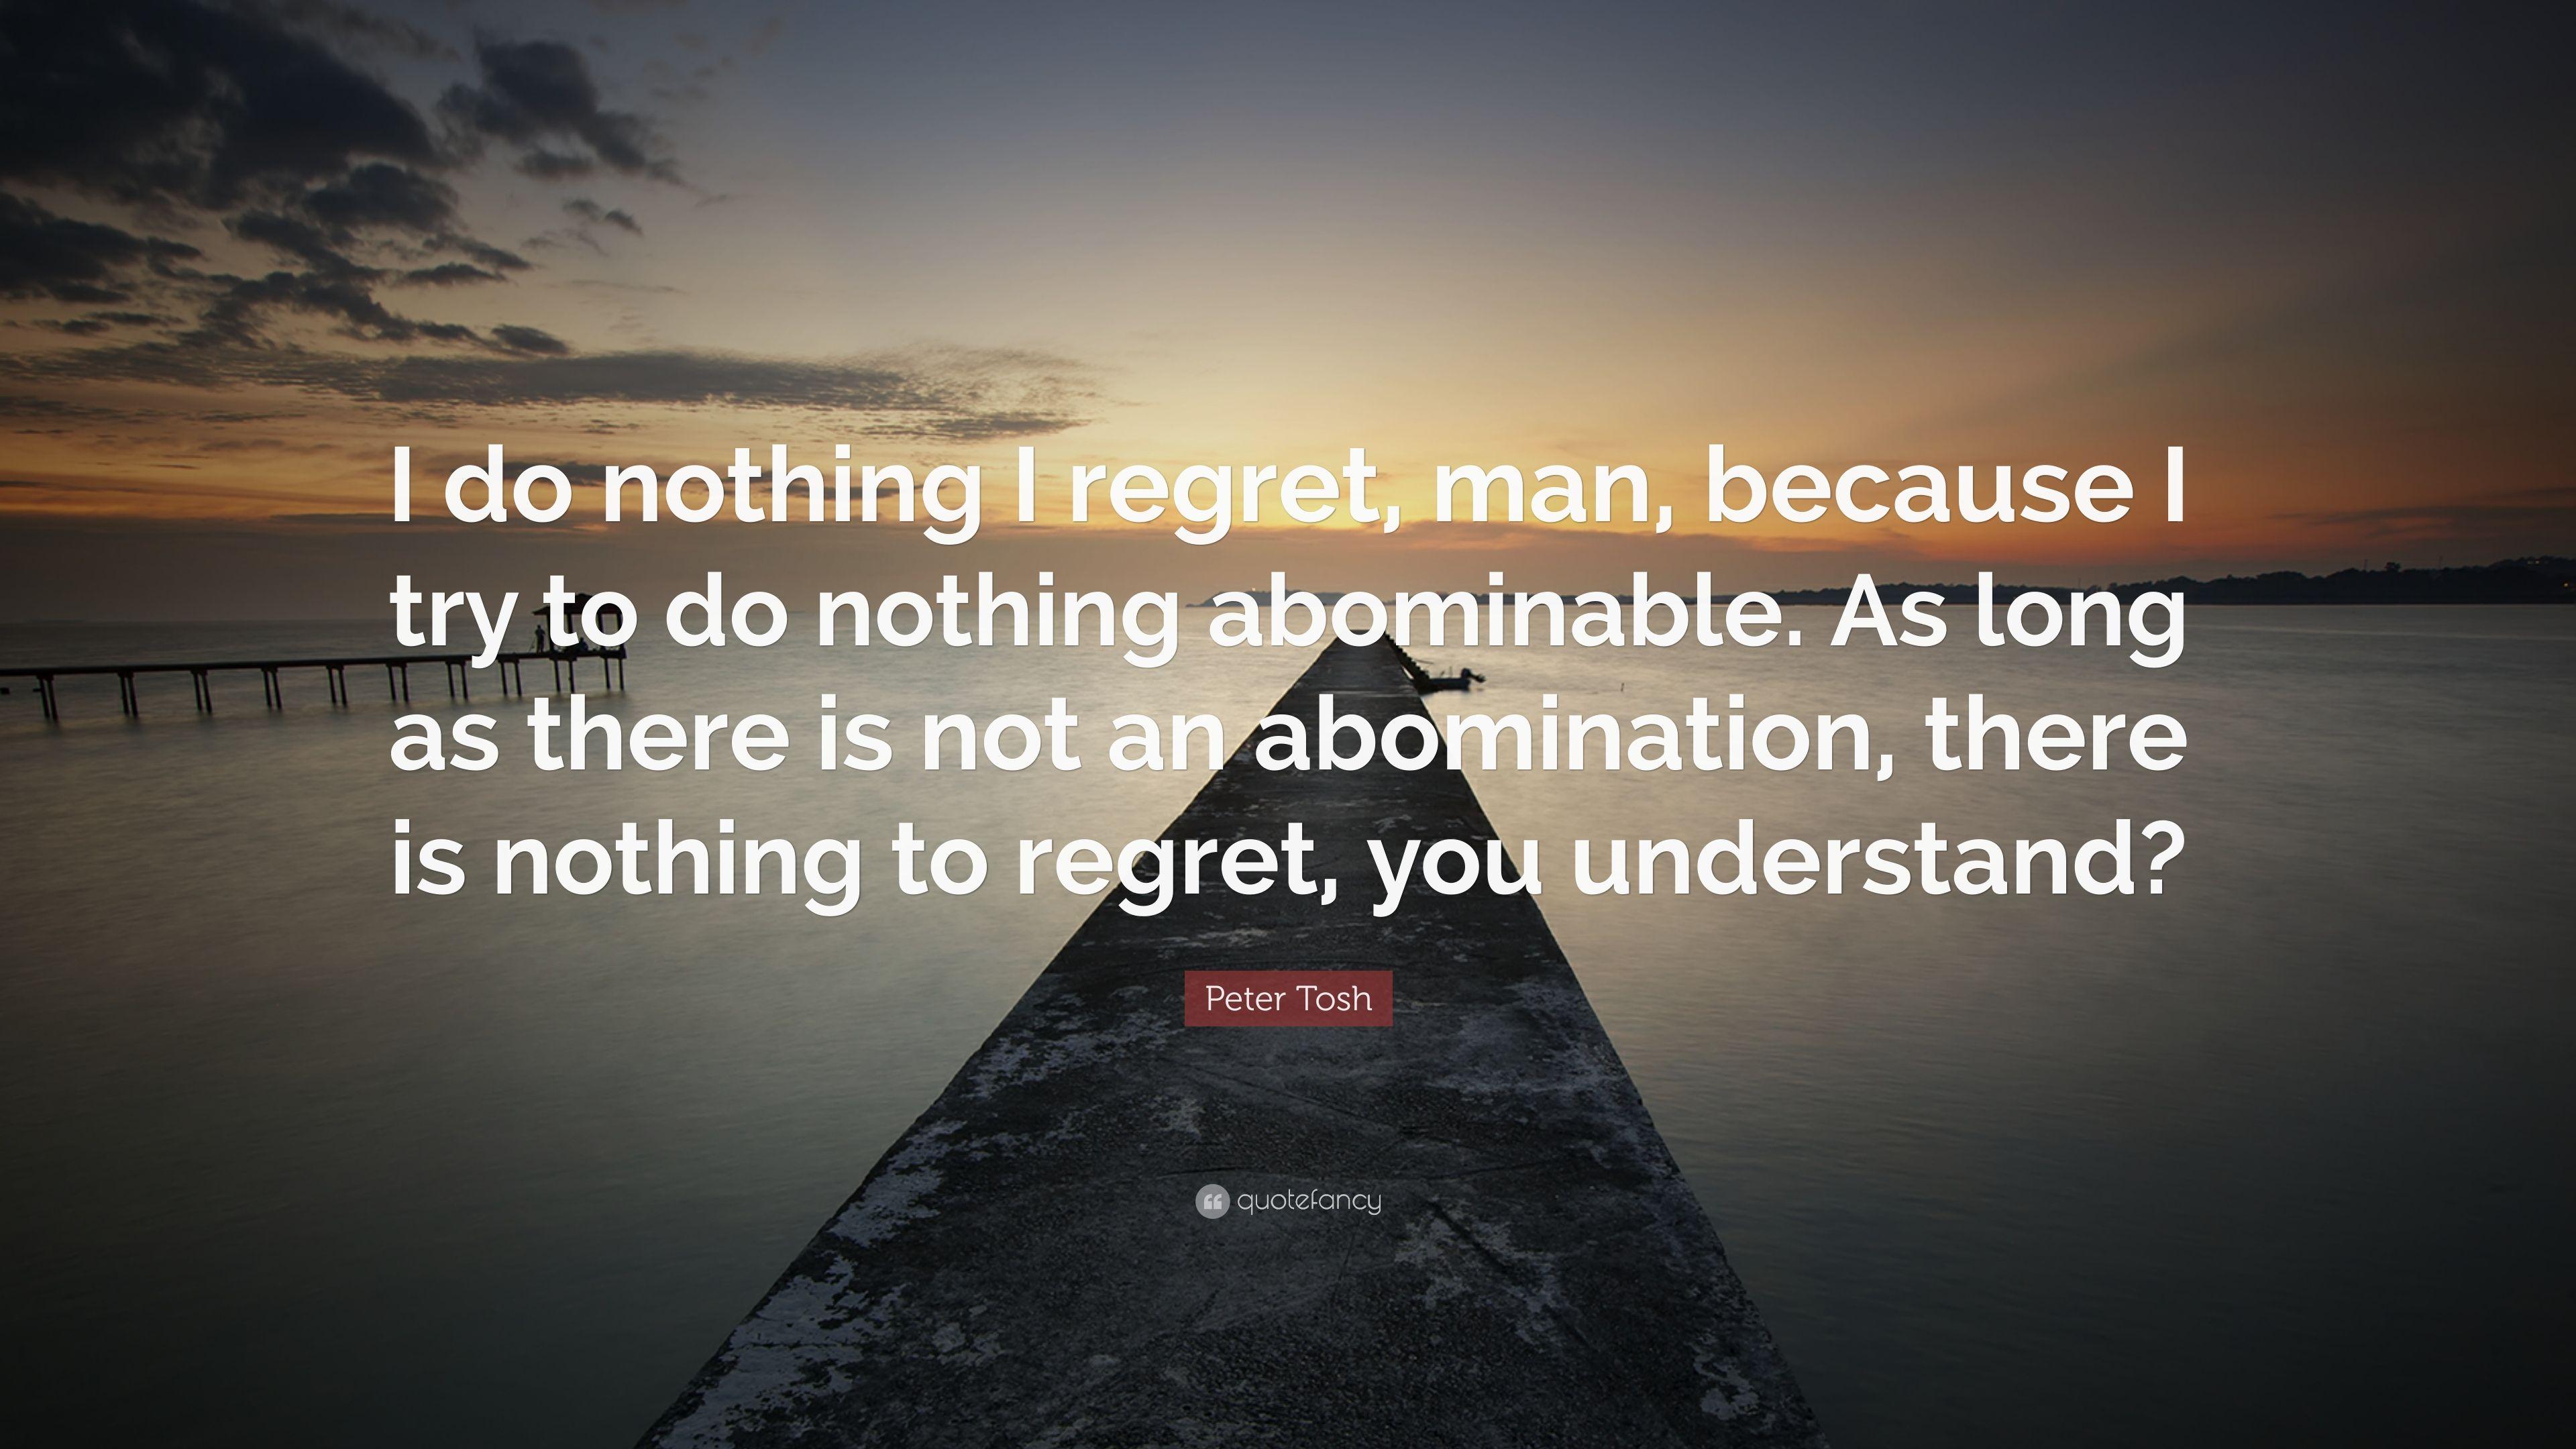 Peter Tosh Quote: “I do nothing I regret, man, because I try to do